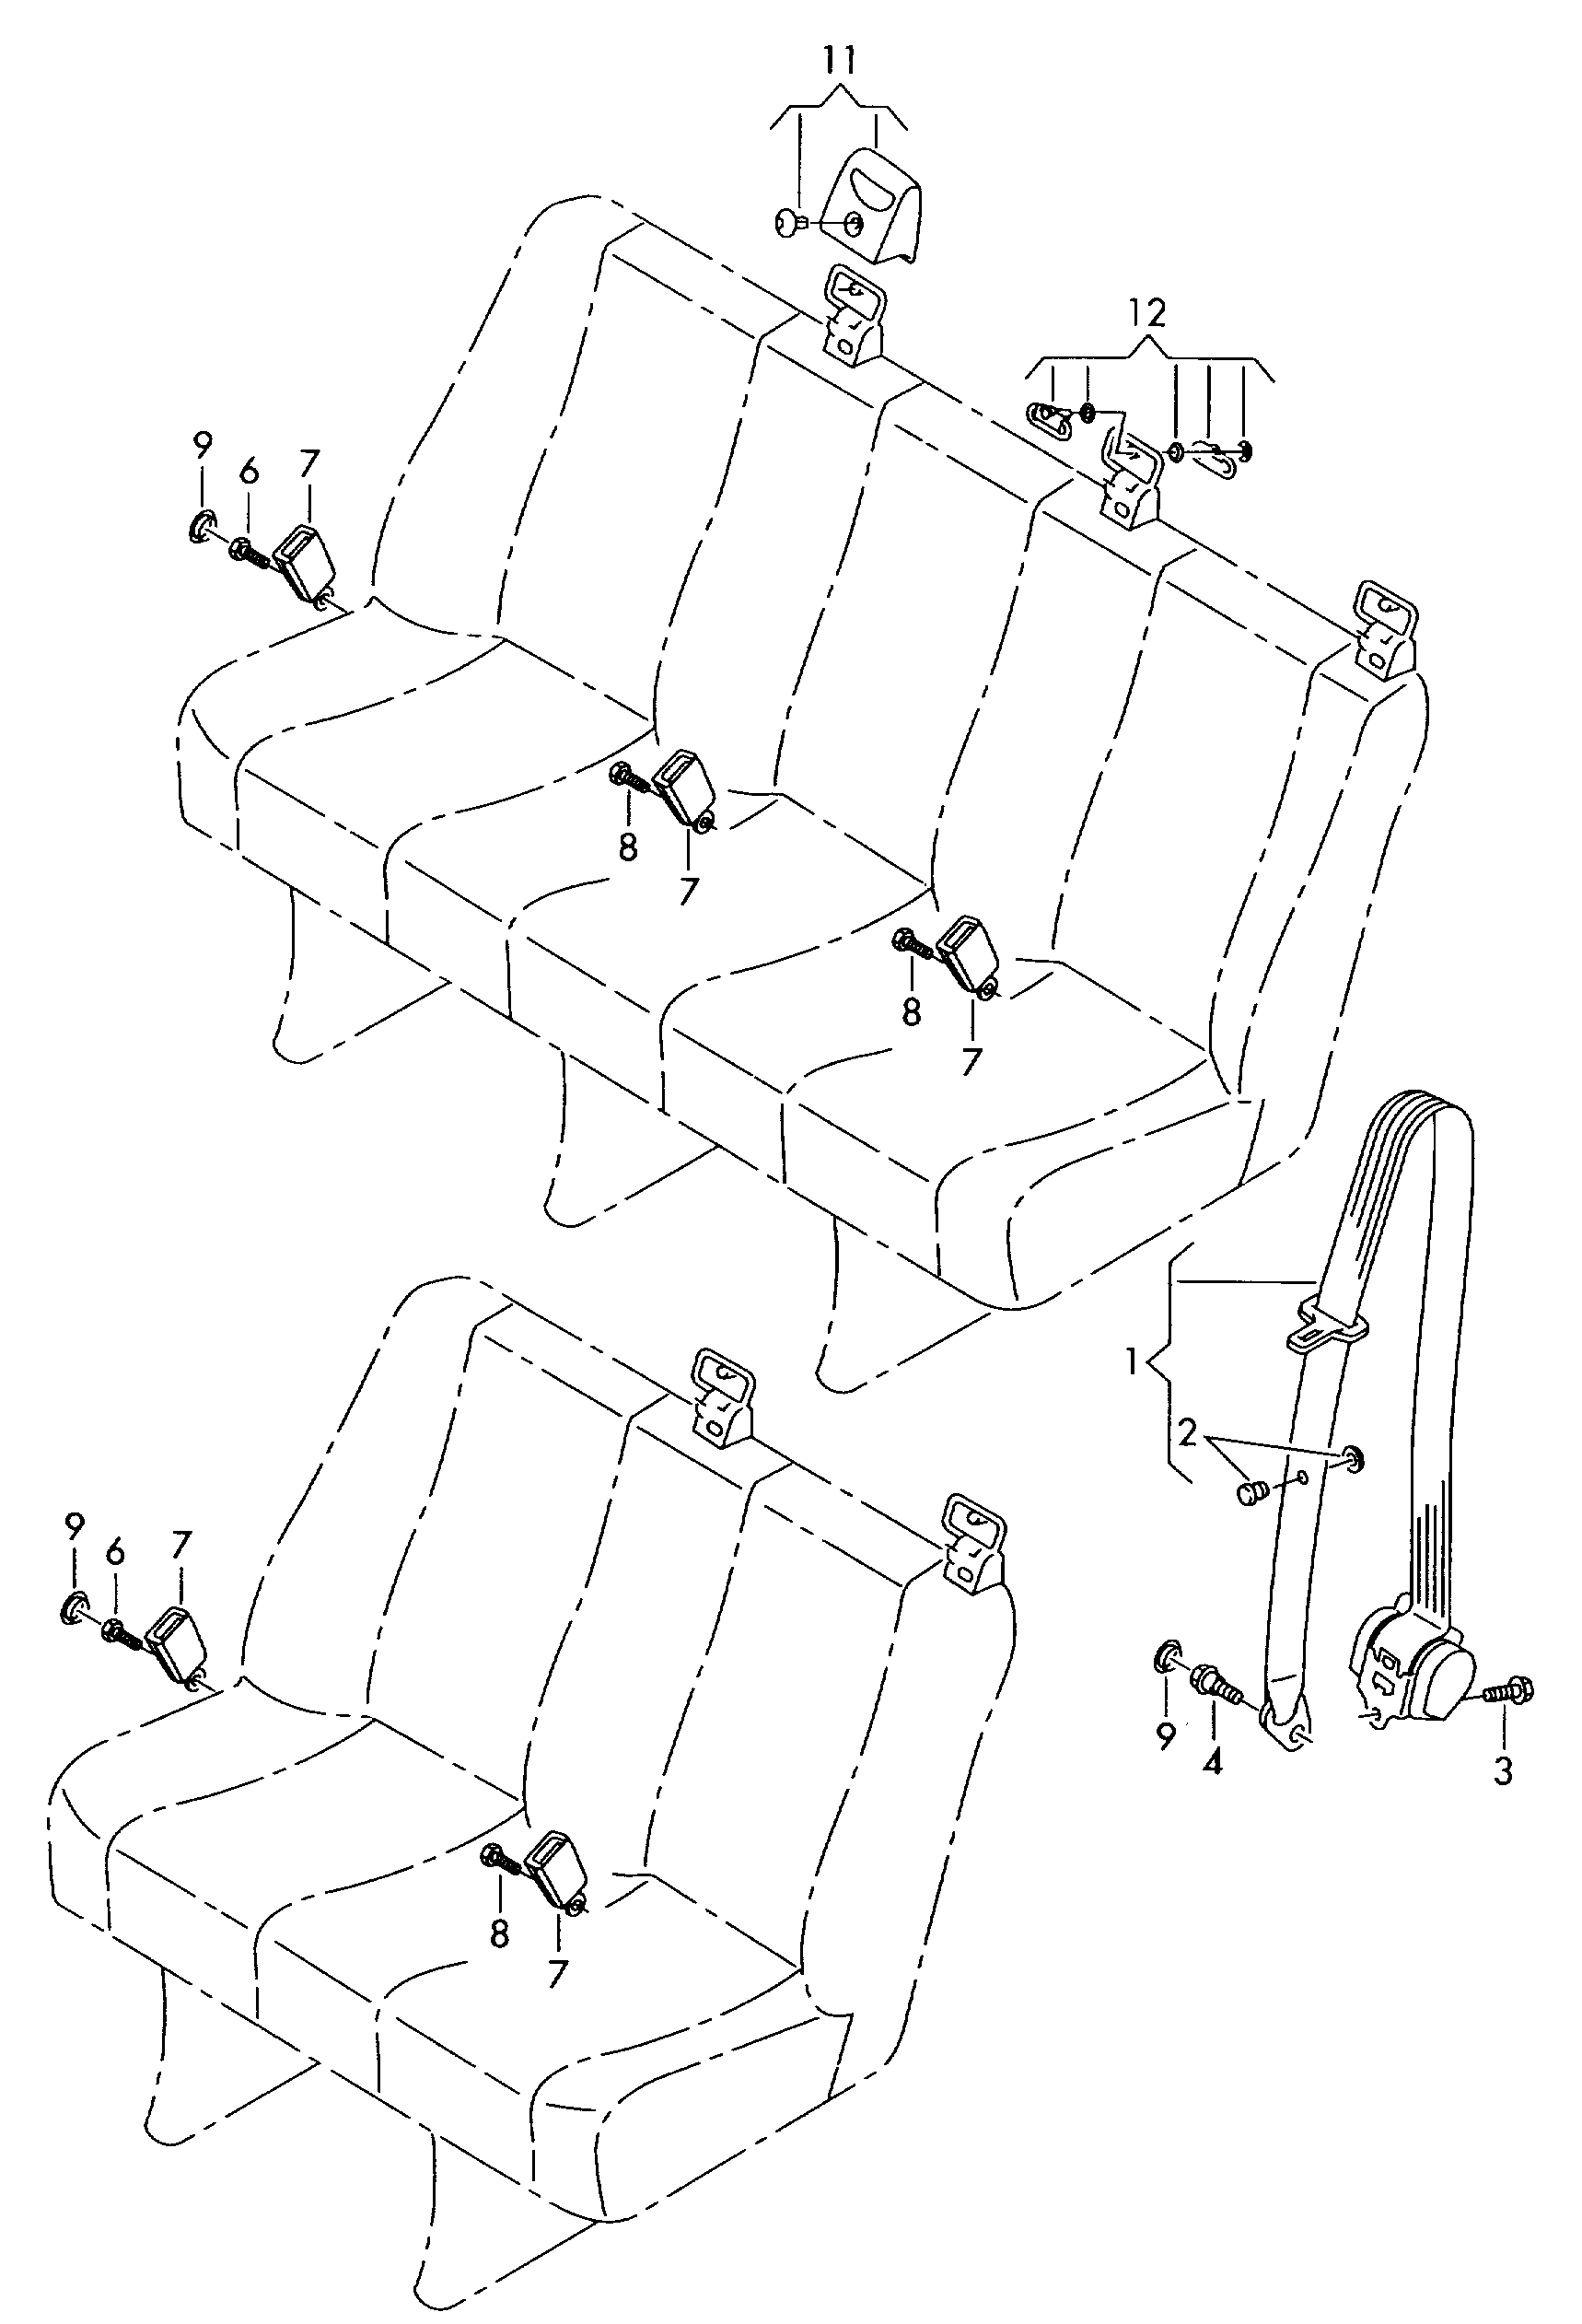 three-point seat belt in<br>passenger compartment 1. seat bench - Crafter - cr